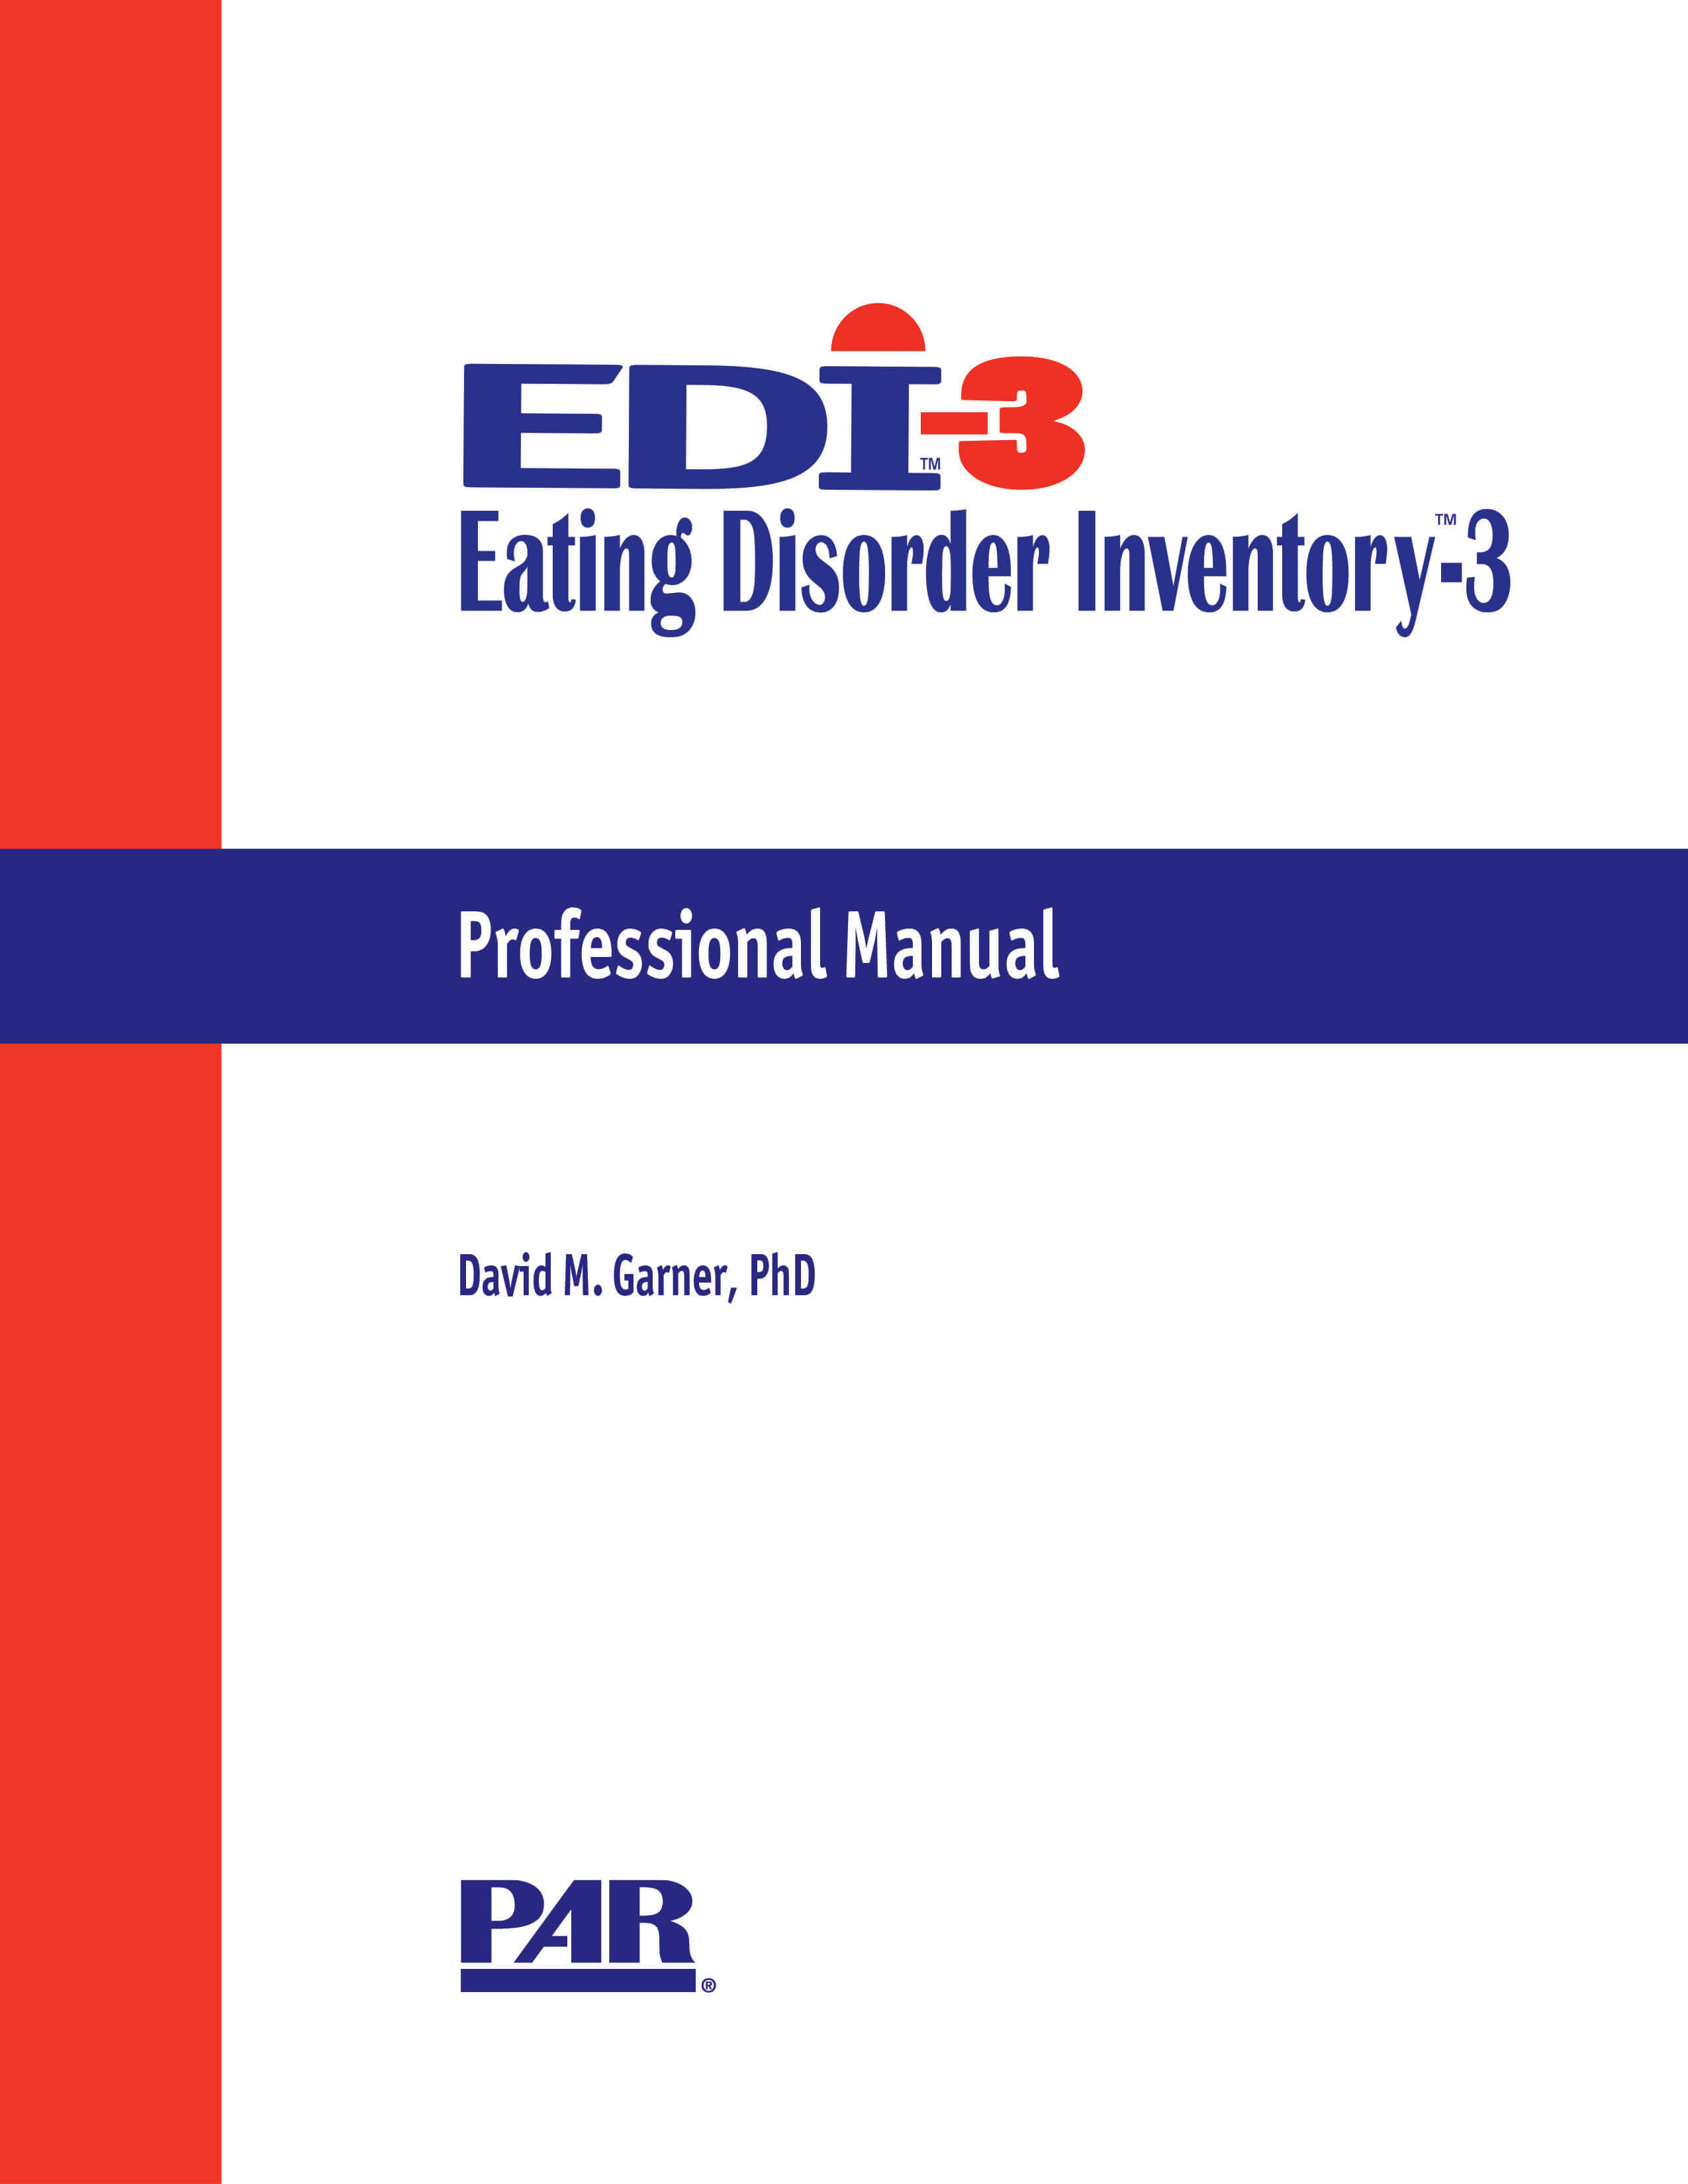 Eating Disorder Inventory™-3 - 